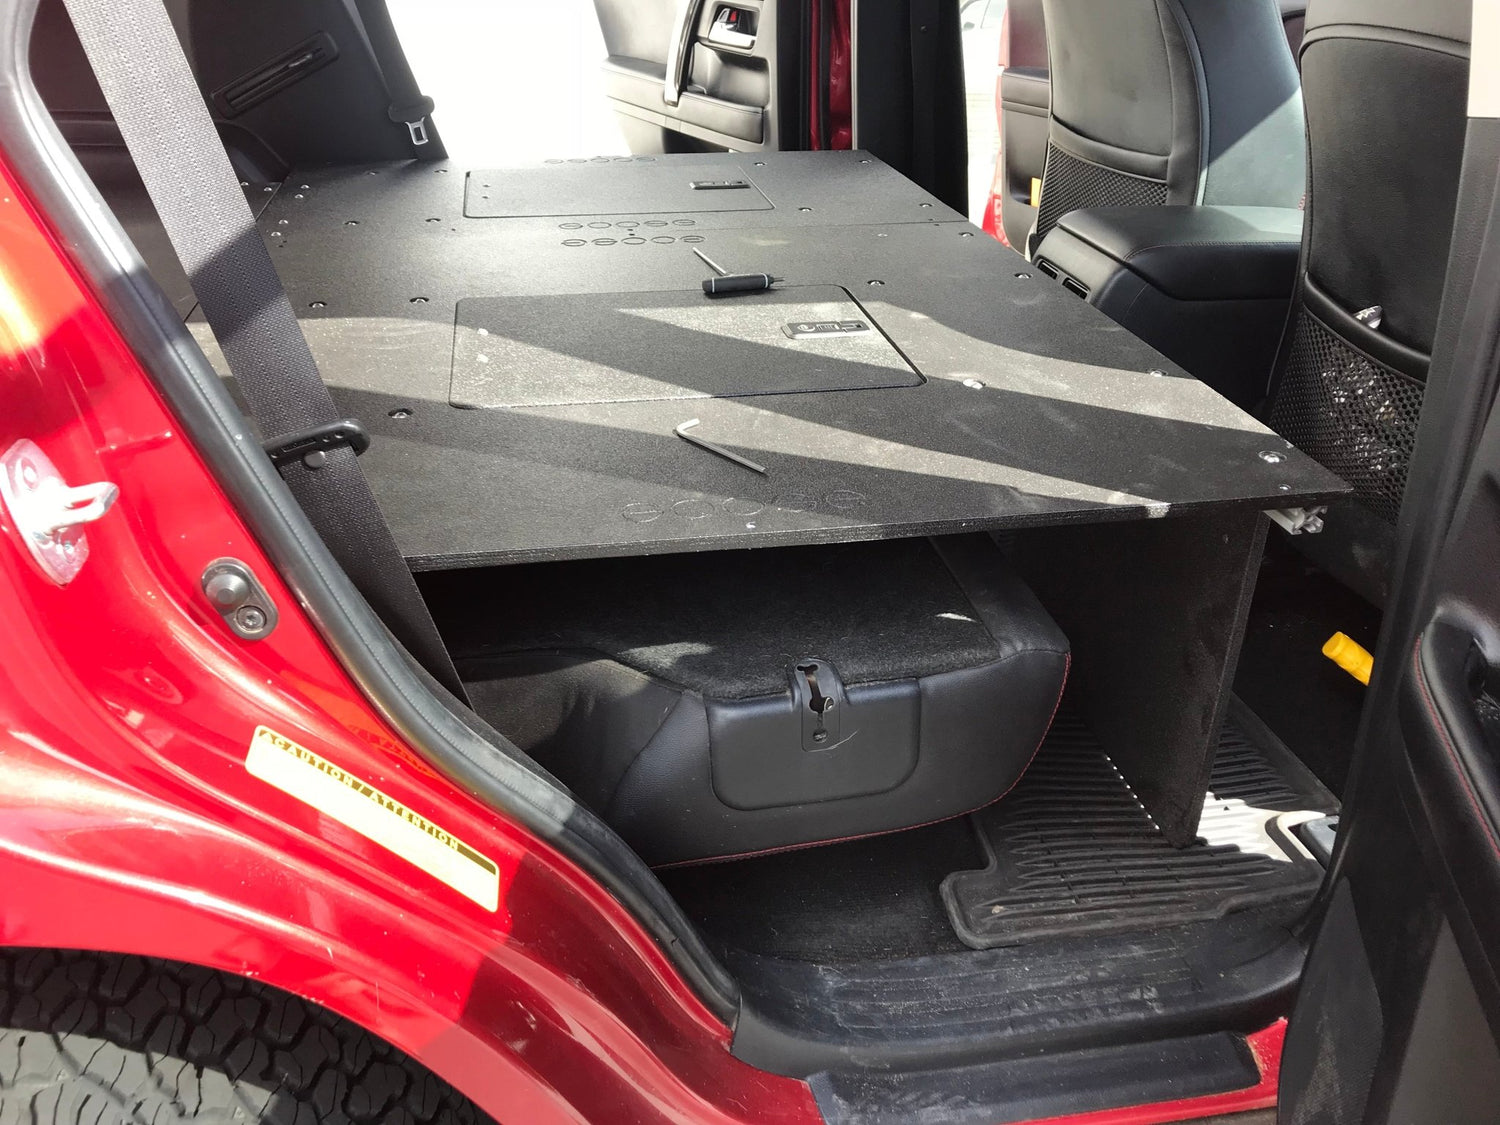 Goose Gear Toyota 4Runner 2010-Present 5th Gen. - Second Row Seat Delete Plate System - Module Height